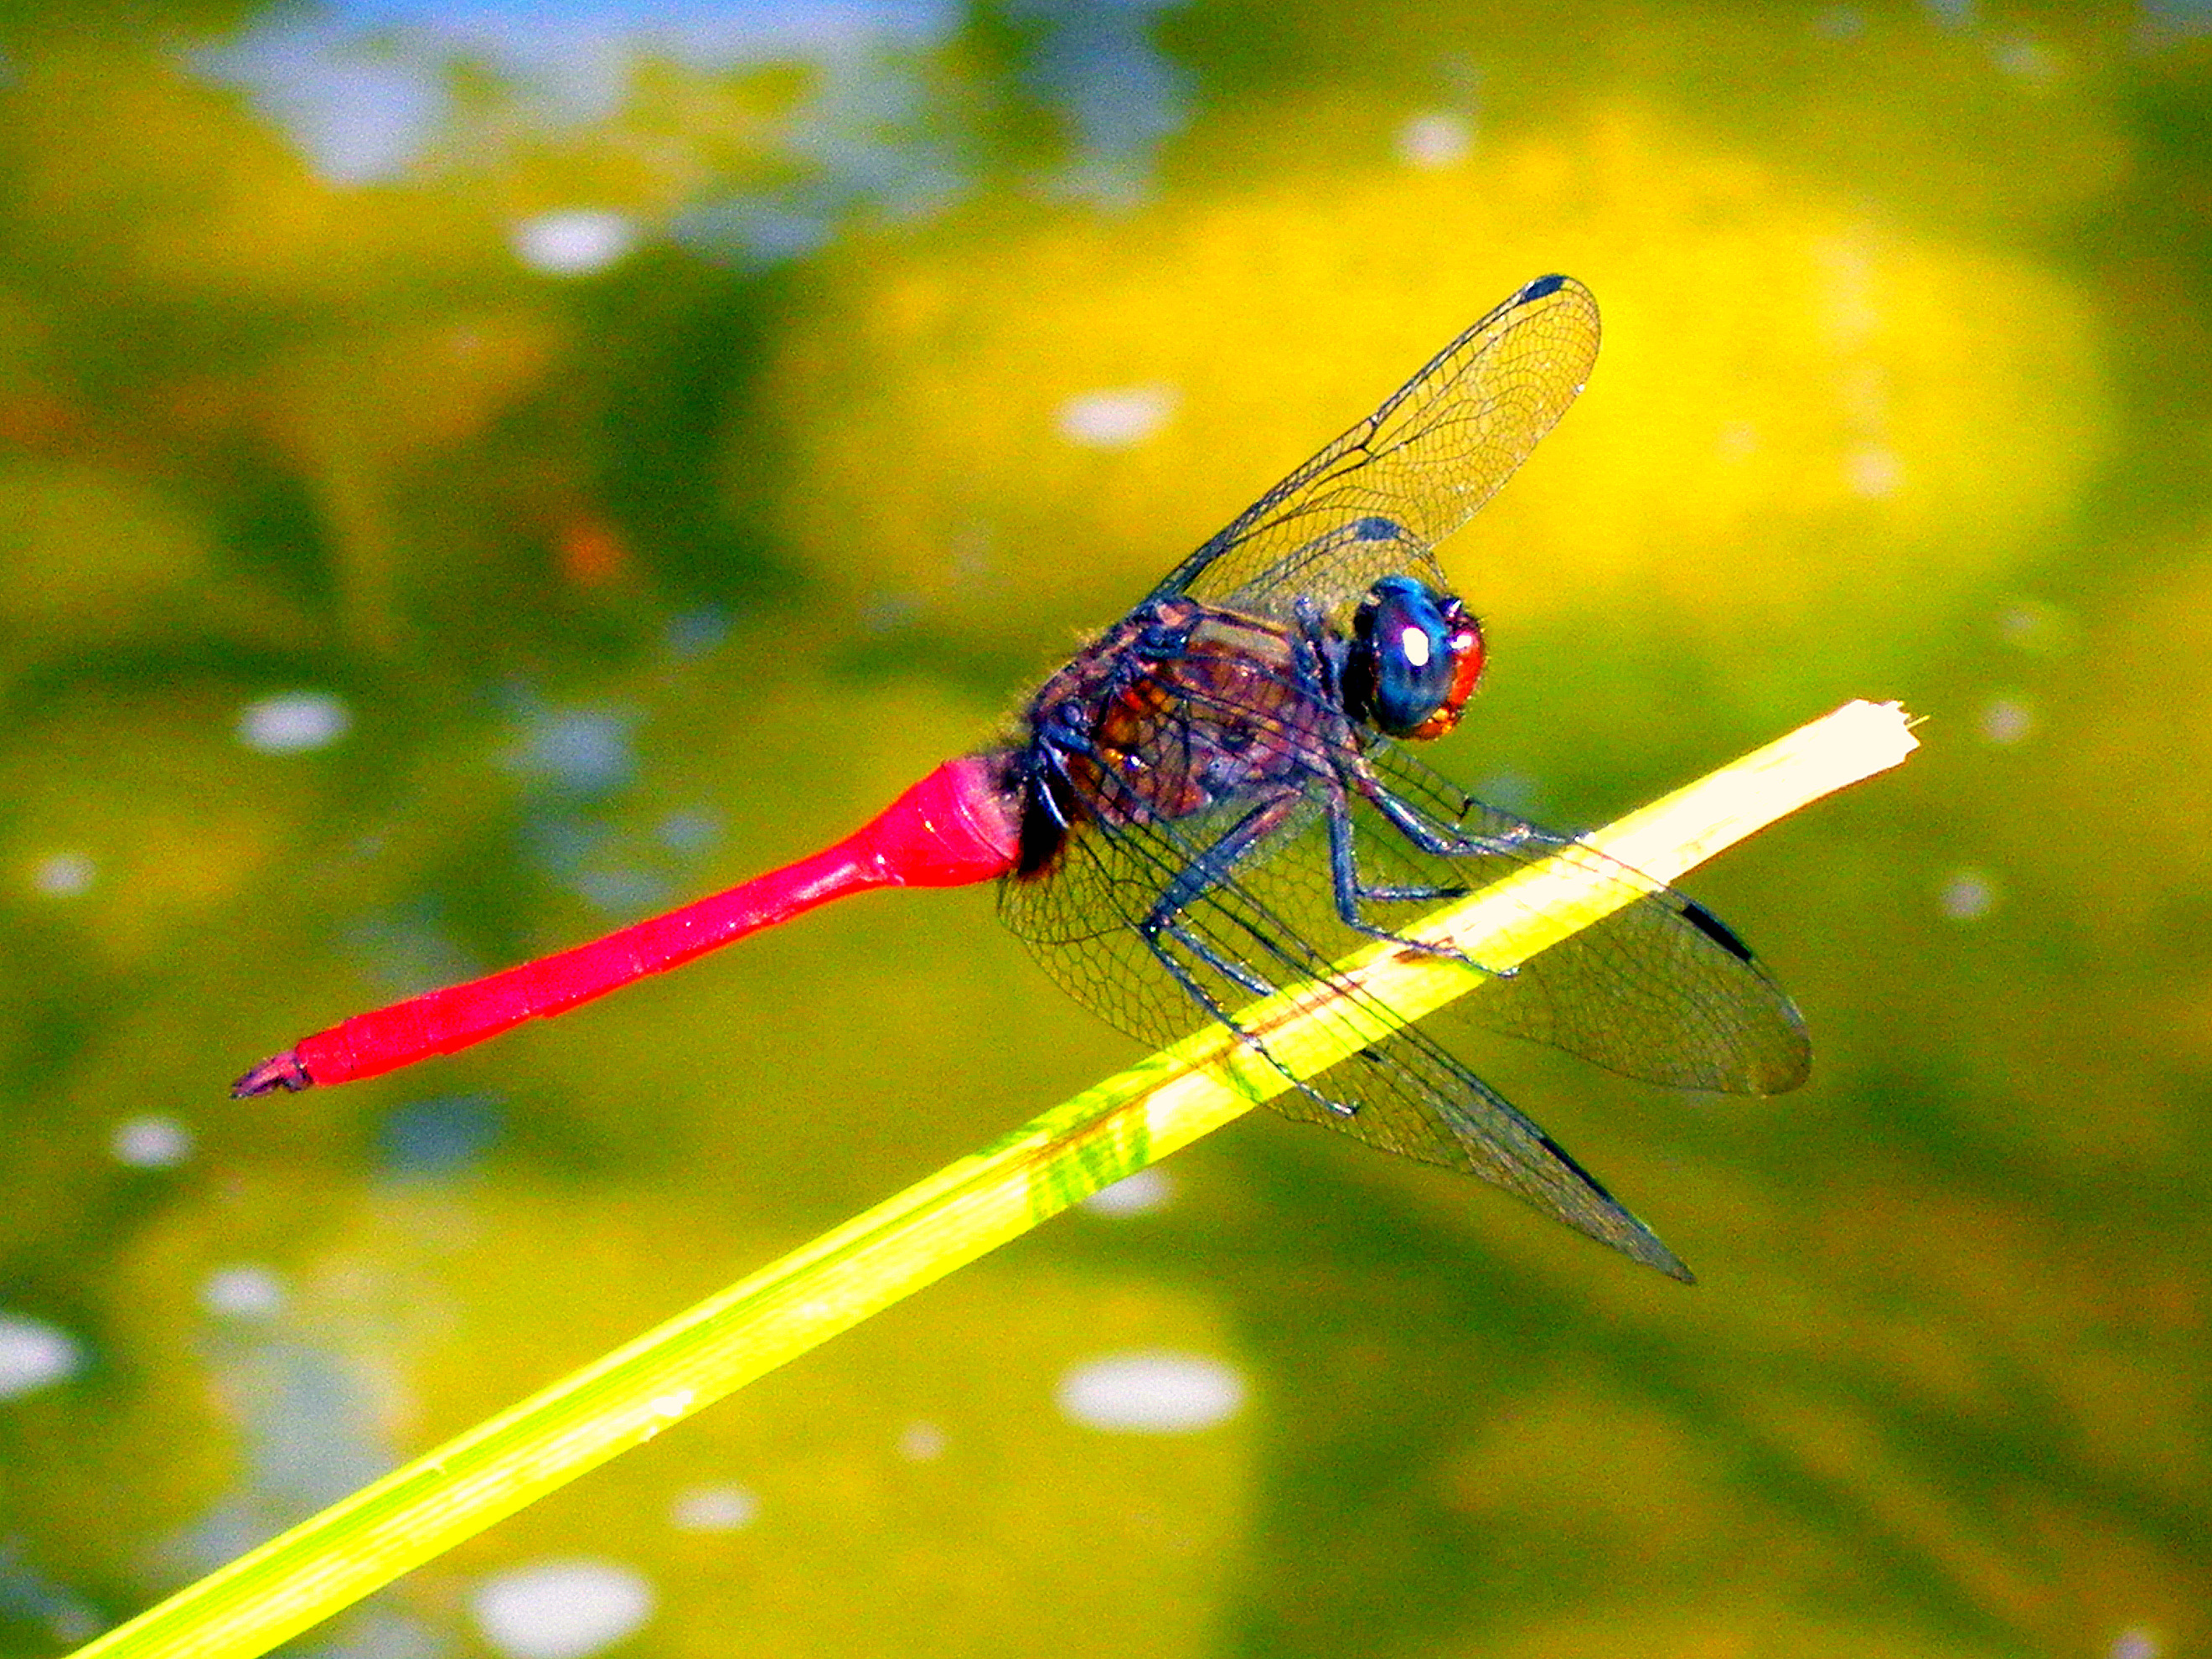 Little Red Dragonfly